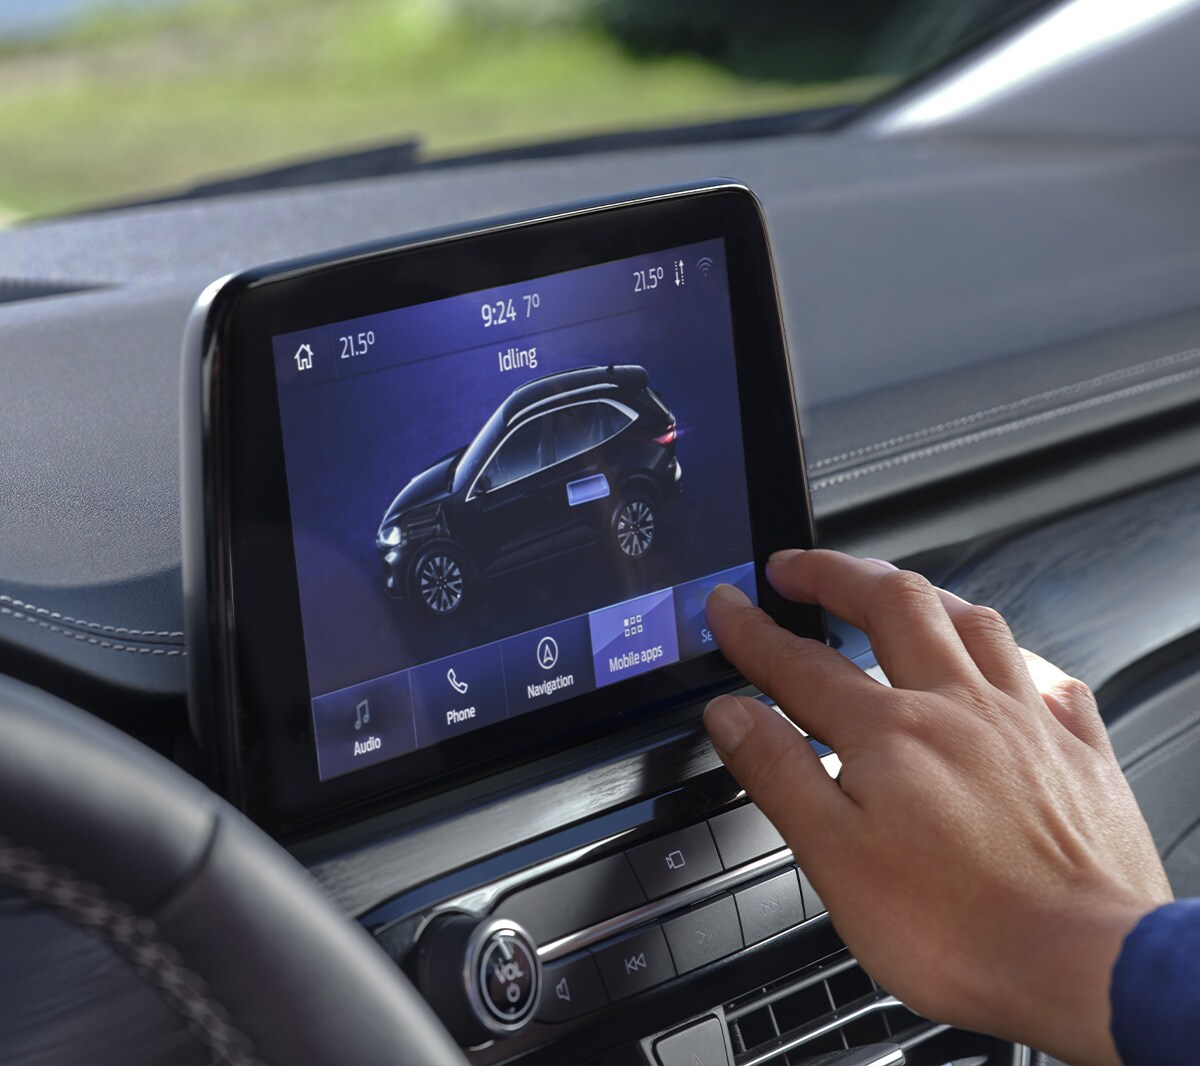 Ford Kuga. Detailansicht des Touchscreens mit Ford SYNC 3